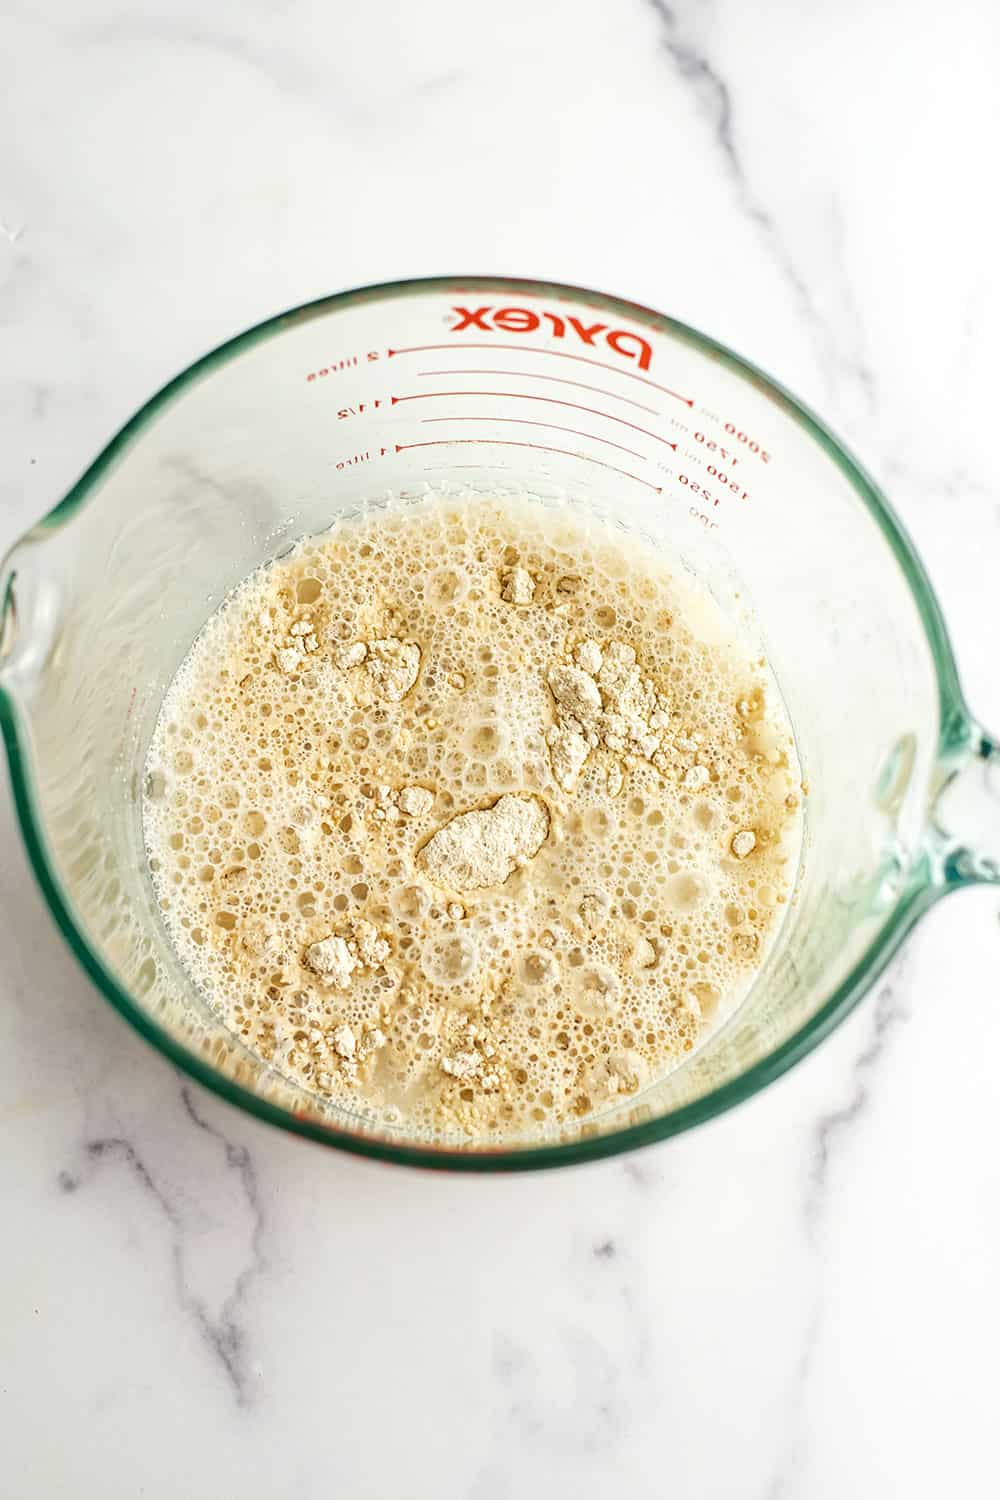 Oat flour, water and salt in a glass mixing bowl.